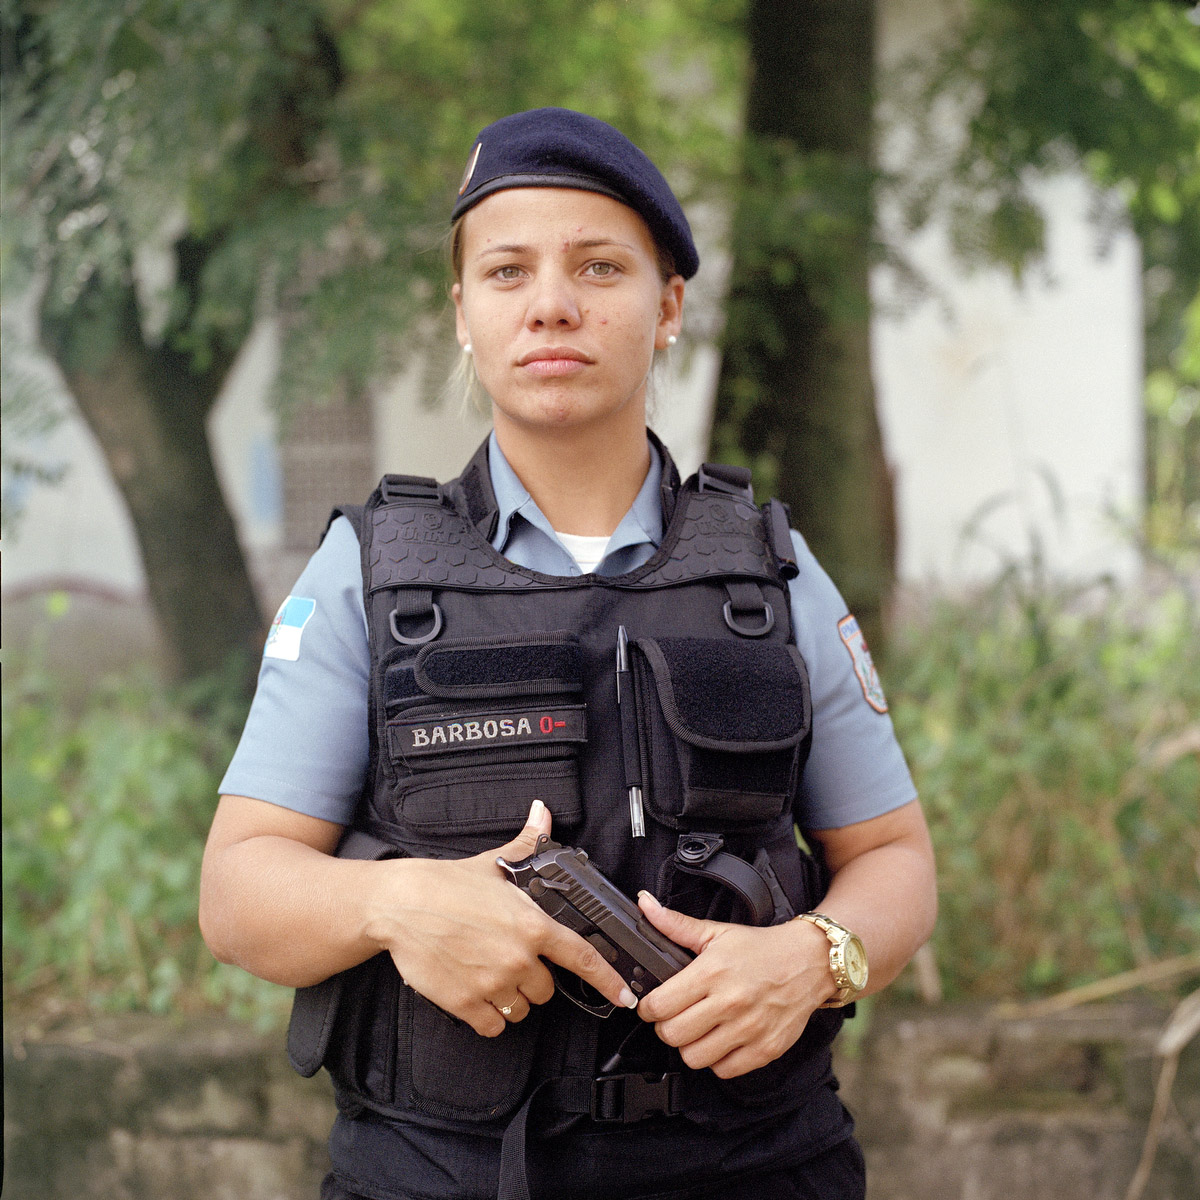 Patrol officer Meriane Barbosa, 30 yrs old, is with the Rapid Response Team of the Pacifying Police Unit (UPP), in Complexo do Caju, Rio de Janeiro, Brazil. 